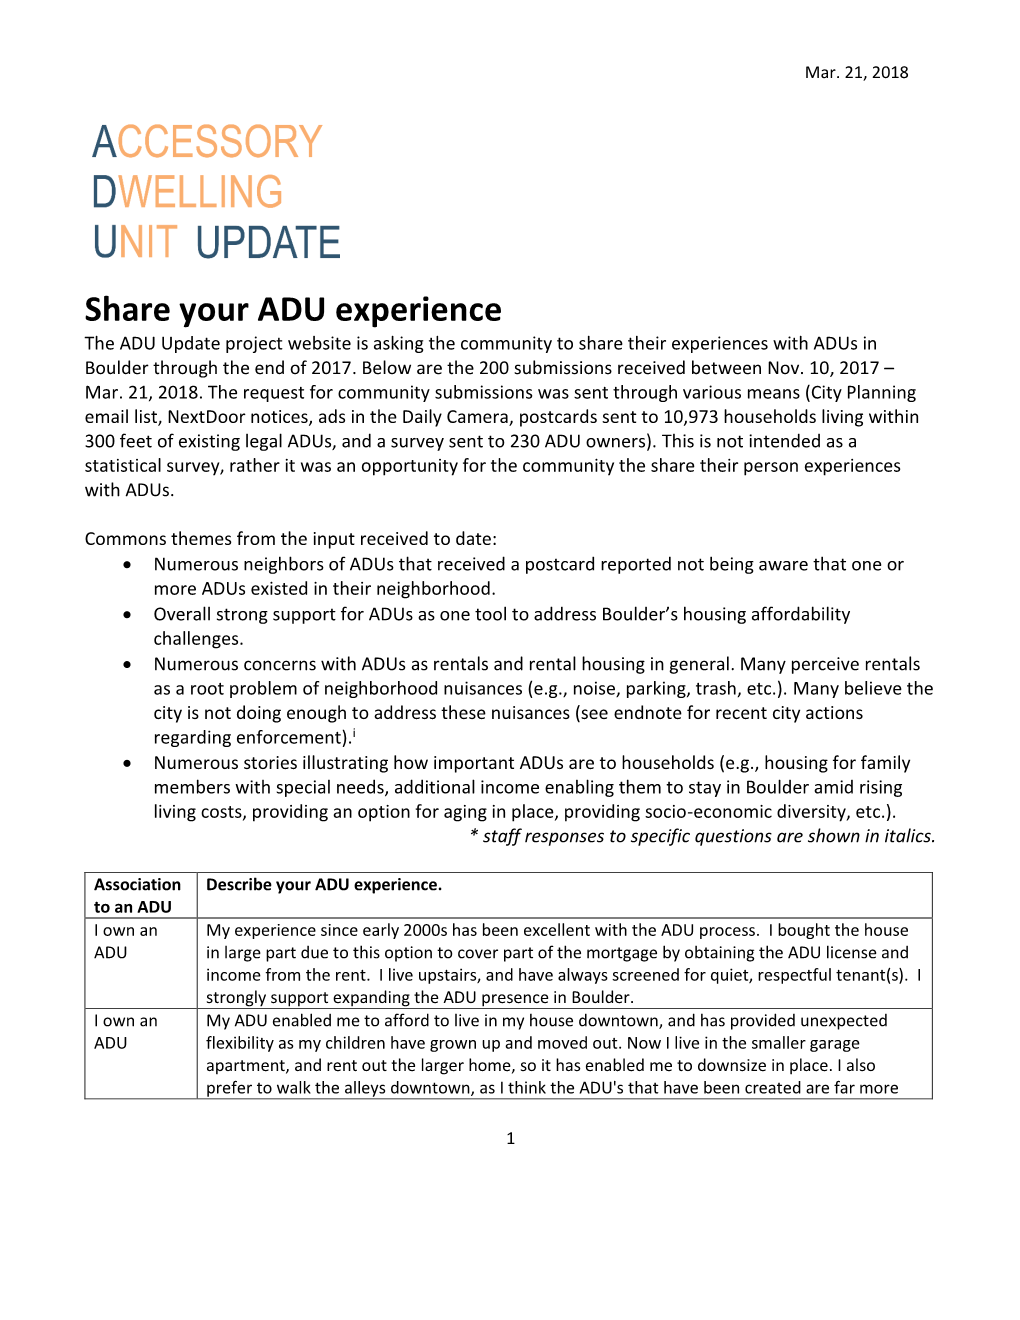 Share Your ADU Experience the ADU Update Project Website Is Asking the Community to Share Their Experiences with Adus in Boulder Through the End of 2017